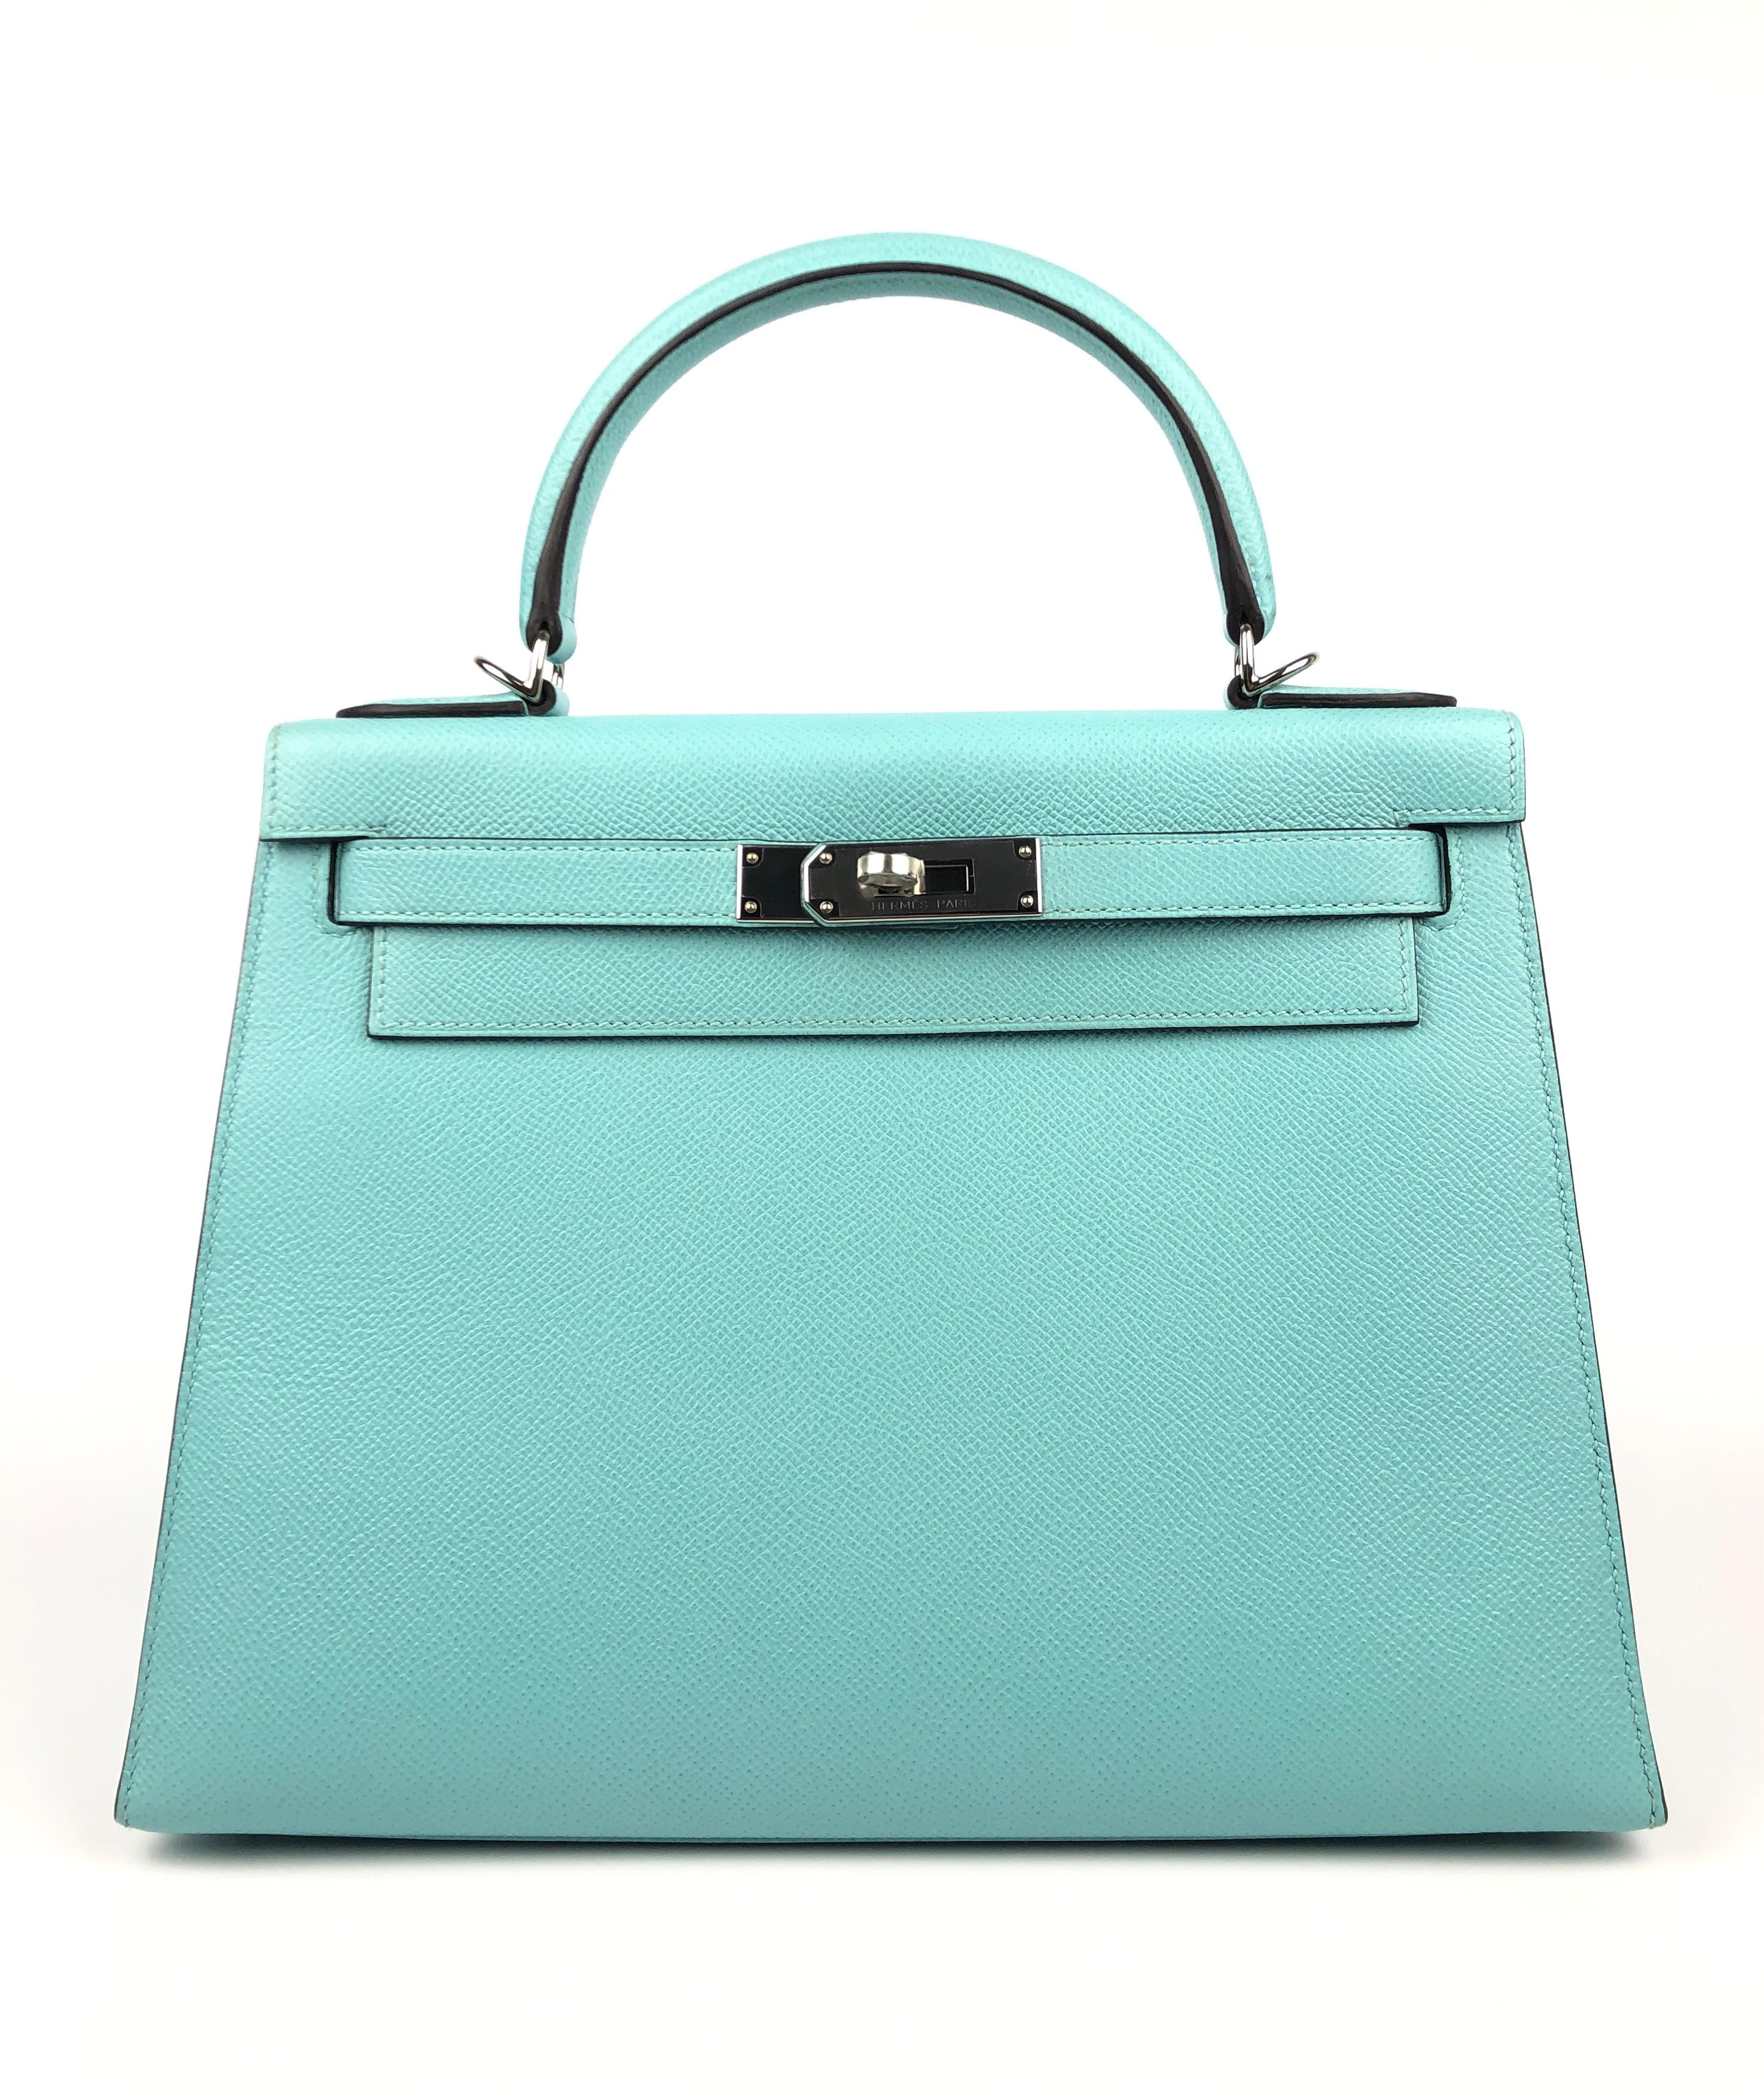 Absolutely Stunning Hermes Kelly 28 Blue Atoll Tiffany Blue Epsom Palladium Hardware. Pristine aLmost As New with All Plastic on hardware and Feet! A Stamp 2017.

Shop With Confidence from Lux Addicts. We are a Platinum Top rated Seller on 1stDibs.